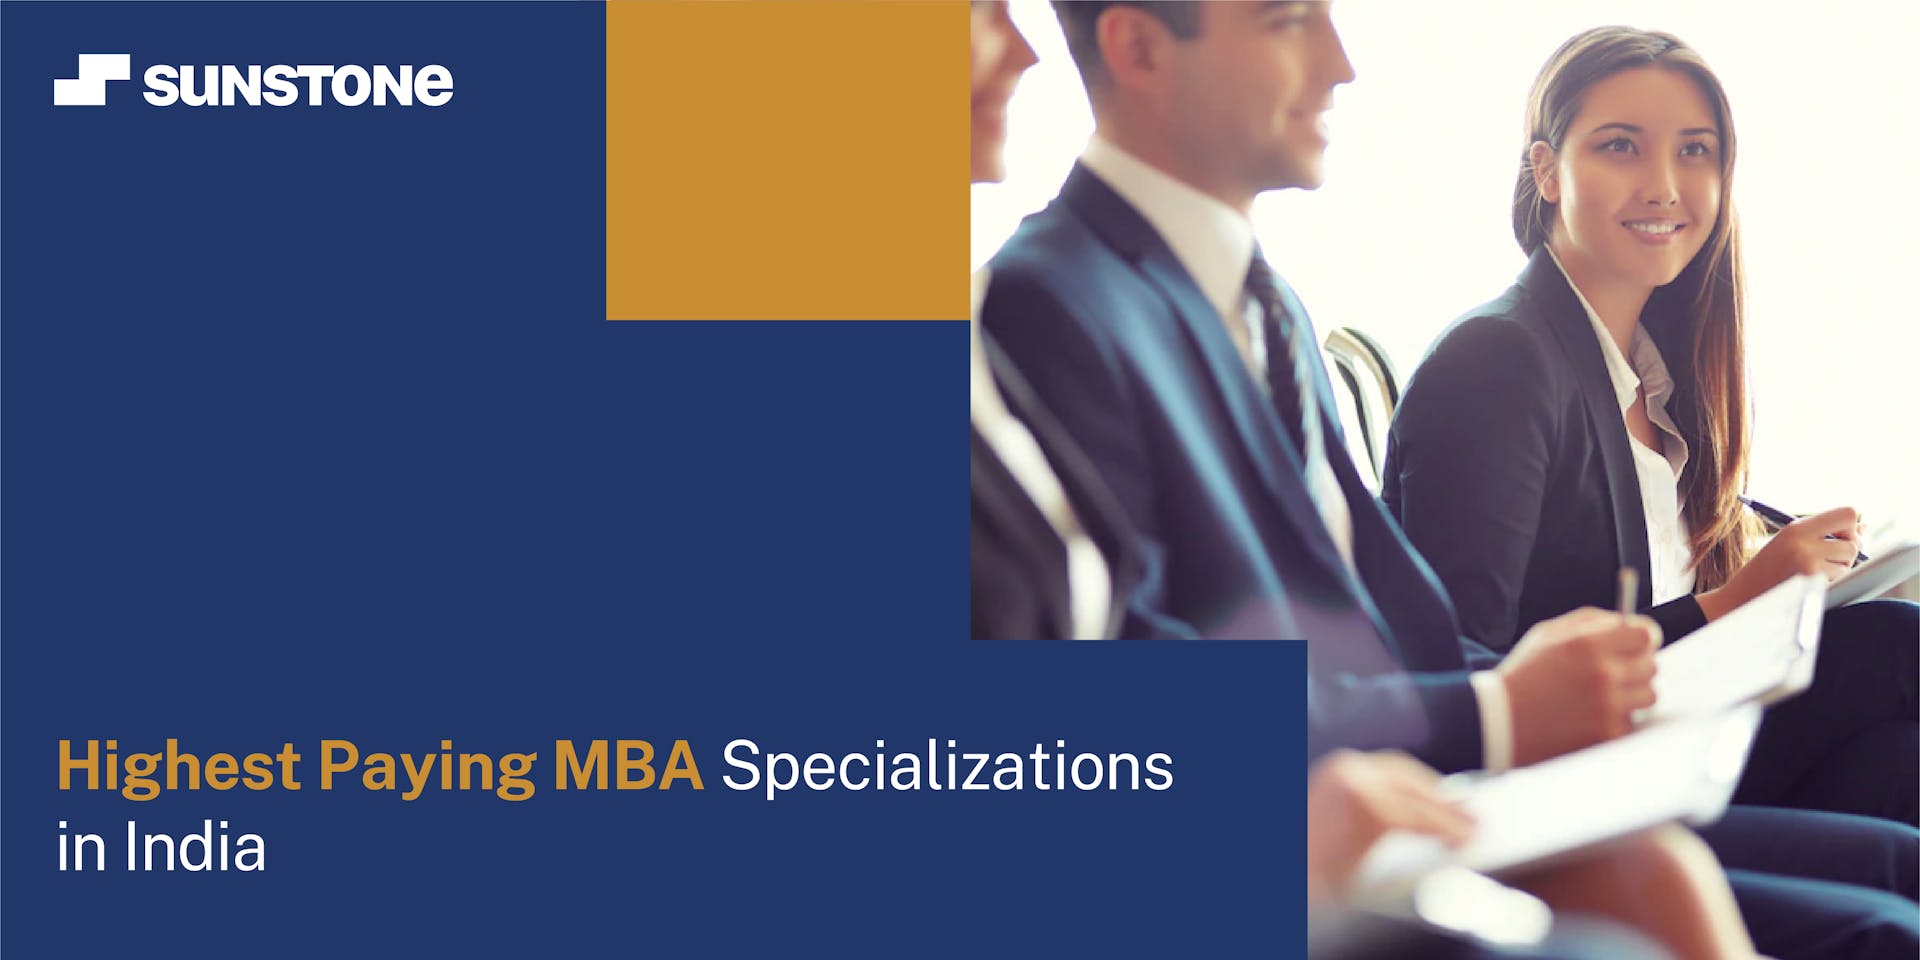 5 Highest Paying MBA Specializations in India